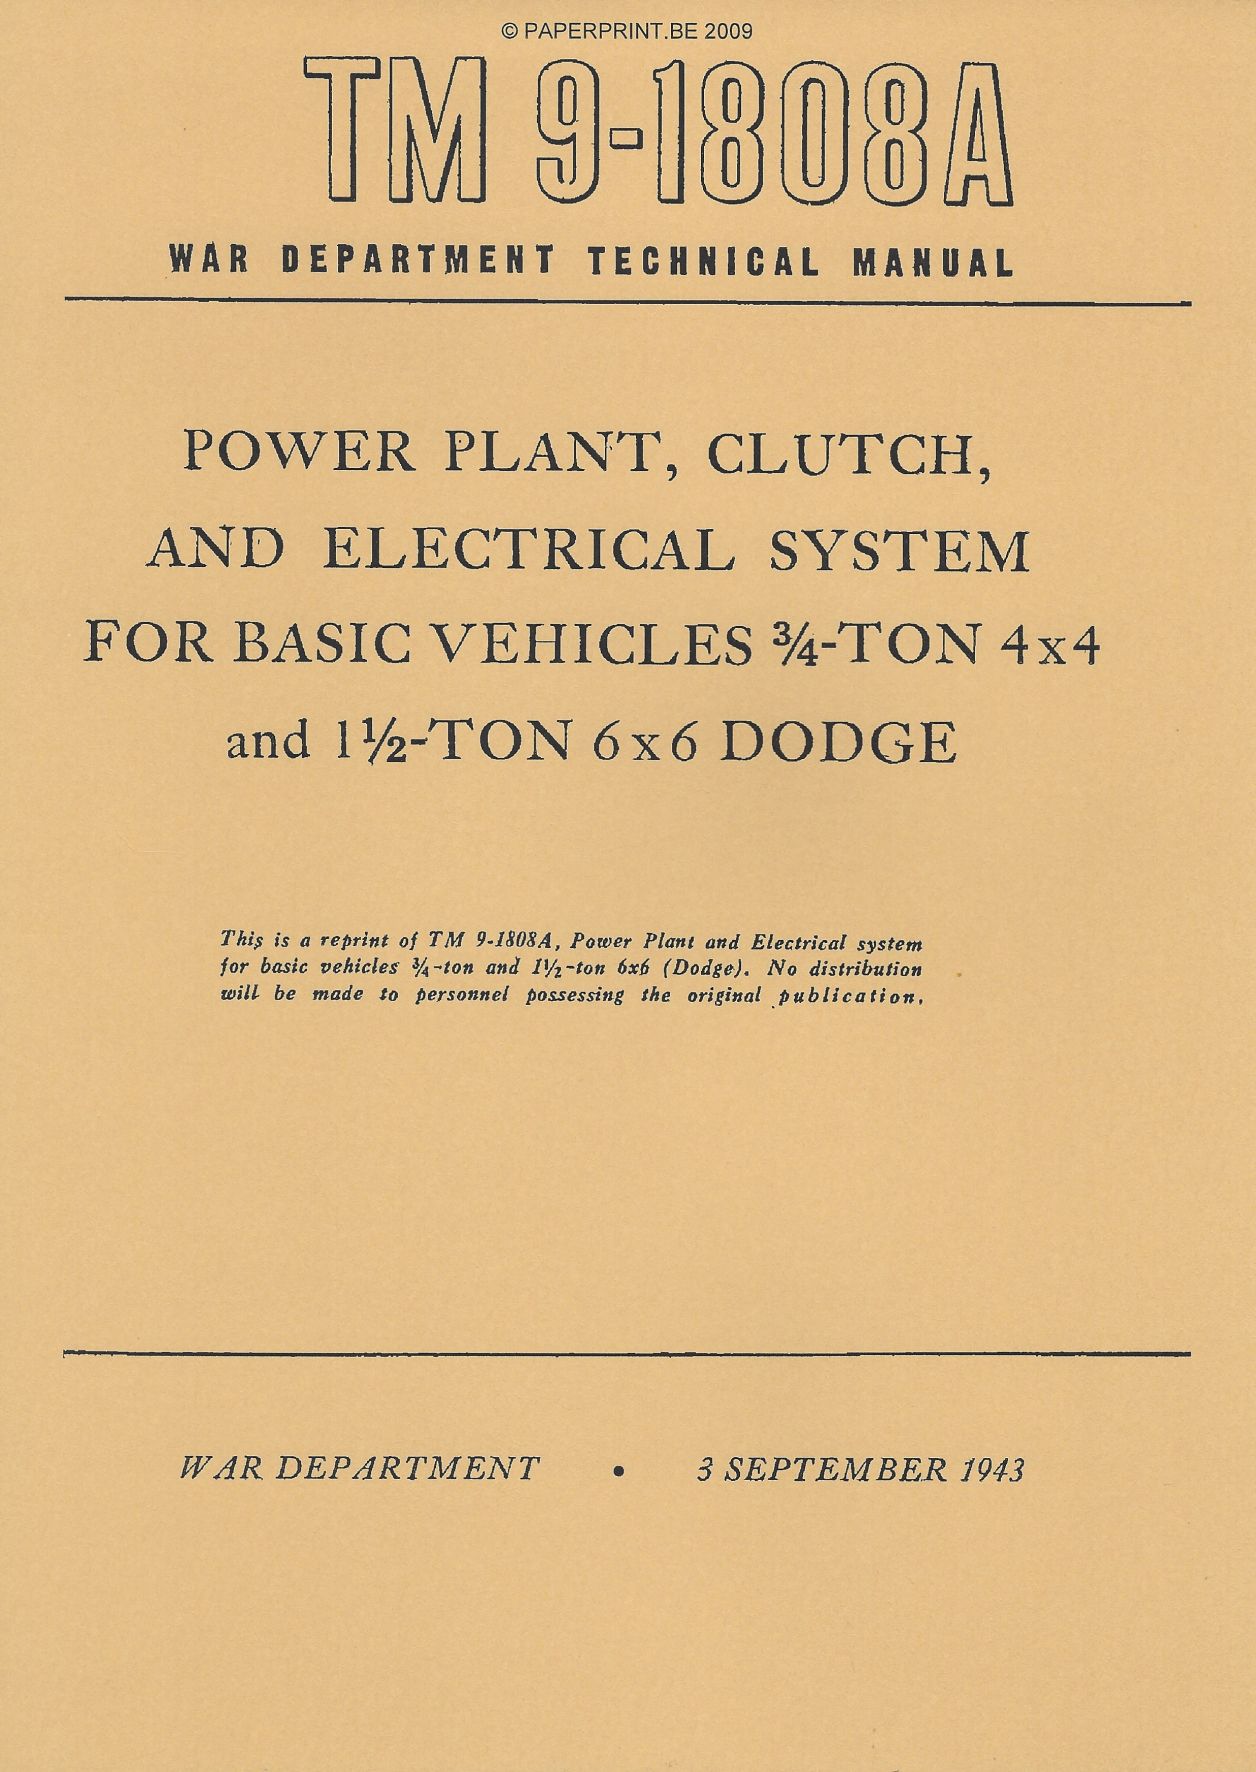 TM 9-1808A US POWER PLANT, CLUTCH AND ELECTRICAL SYSTEM FOR BASIC VEHICLES ¾ - TON 4x4 AND 1 ½ - TON 6x6 DODGE